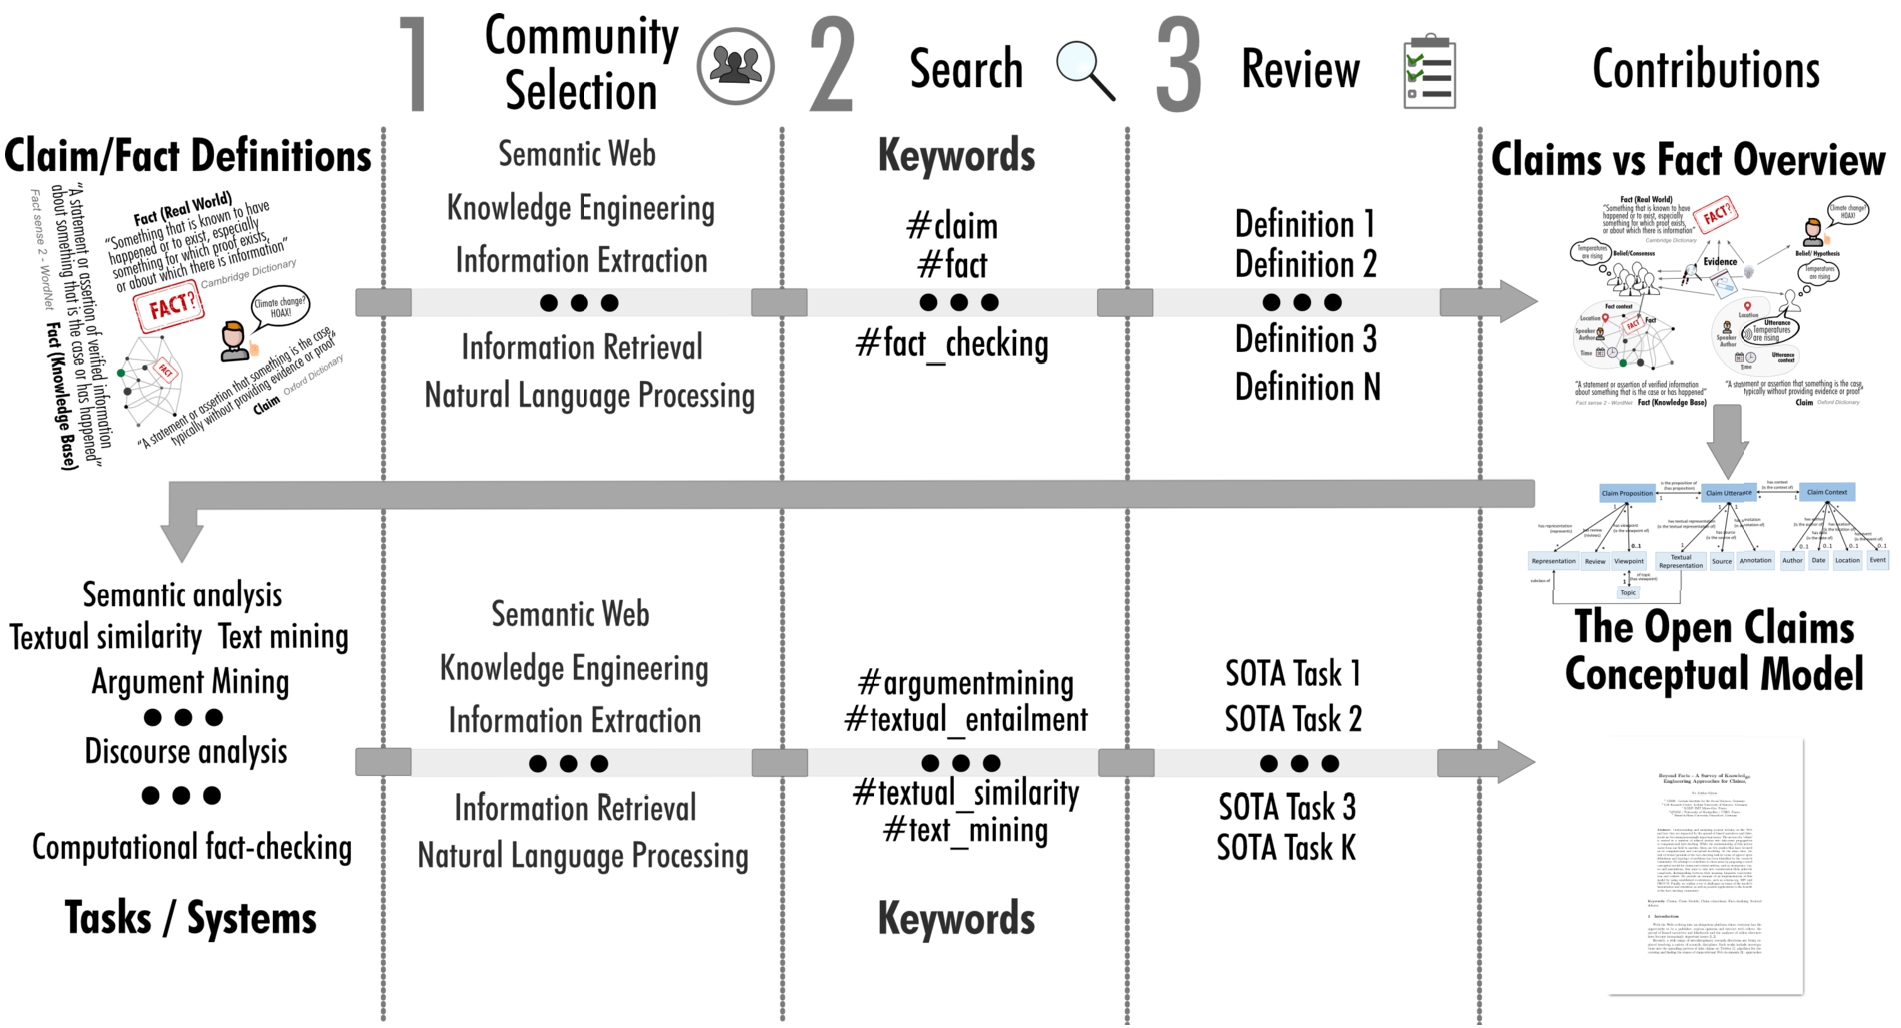 Publication selection and review workflow.